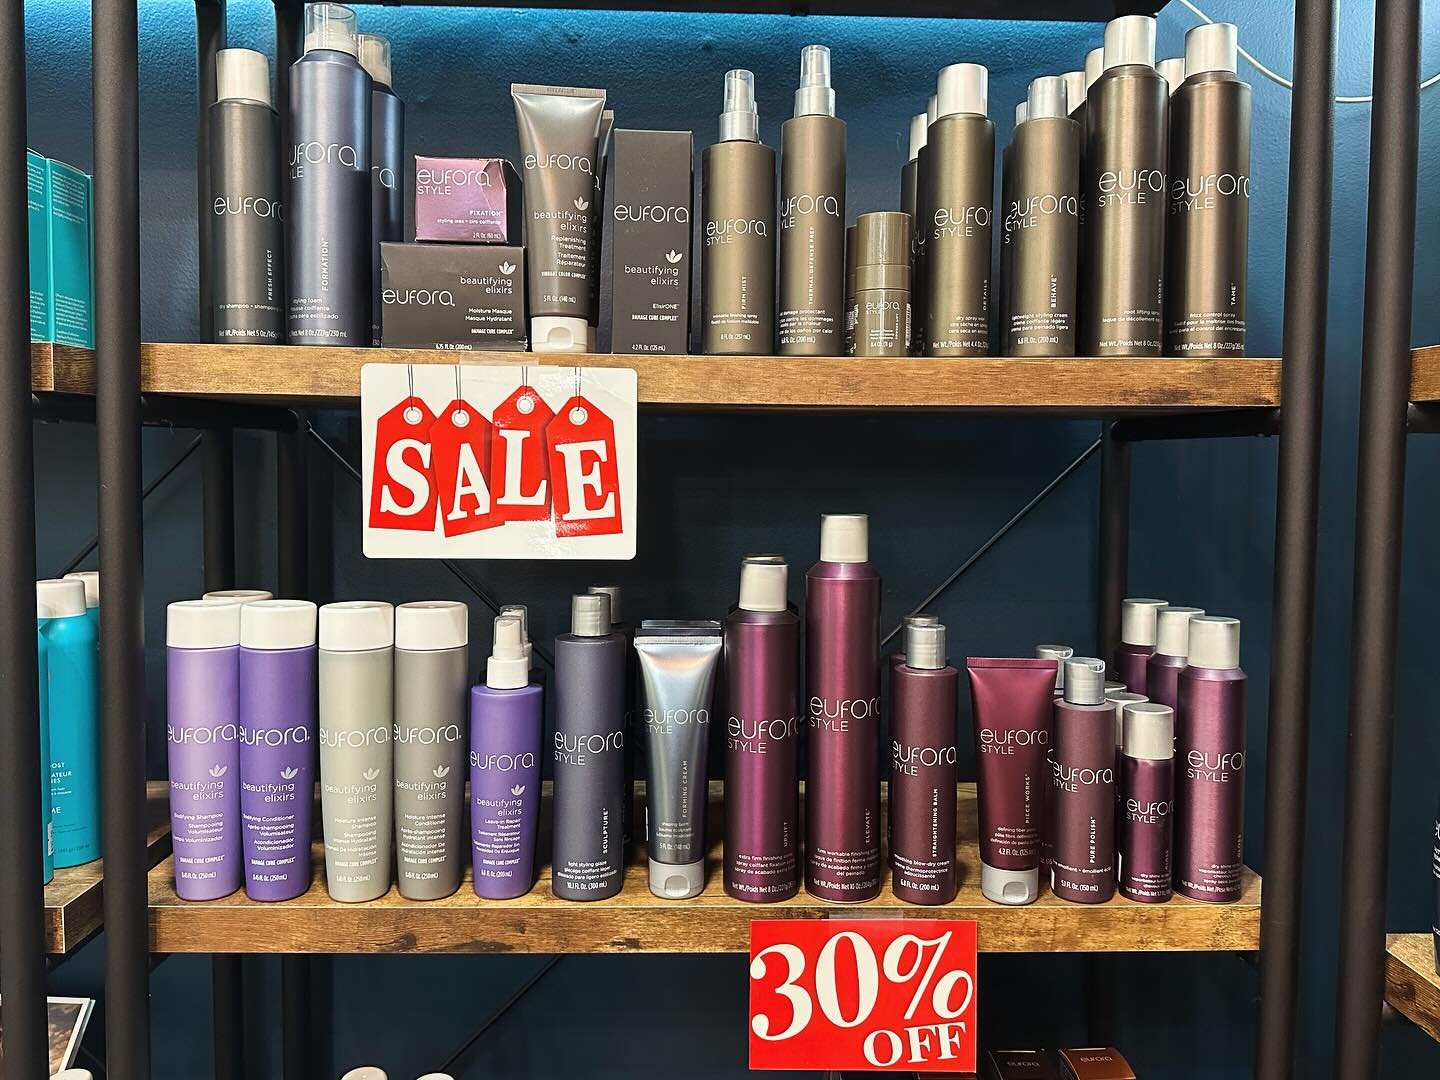 Get your favorite Eufora hair products for 30% off AND be entered to win an infrared hair dryer! 🤩 (Deadline is June 15.) We already have lots of entries so come on in to Splitting Hairs to take advantage of this opportunity!

#splittinghairssalon #